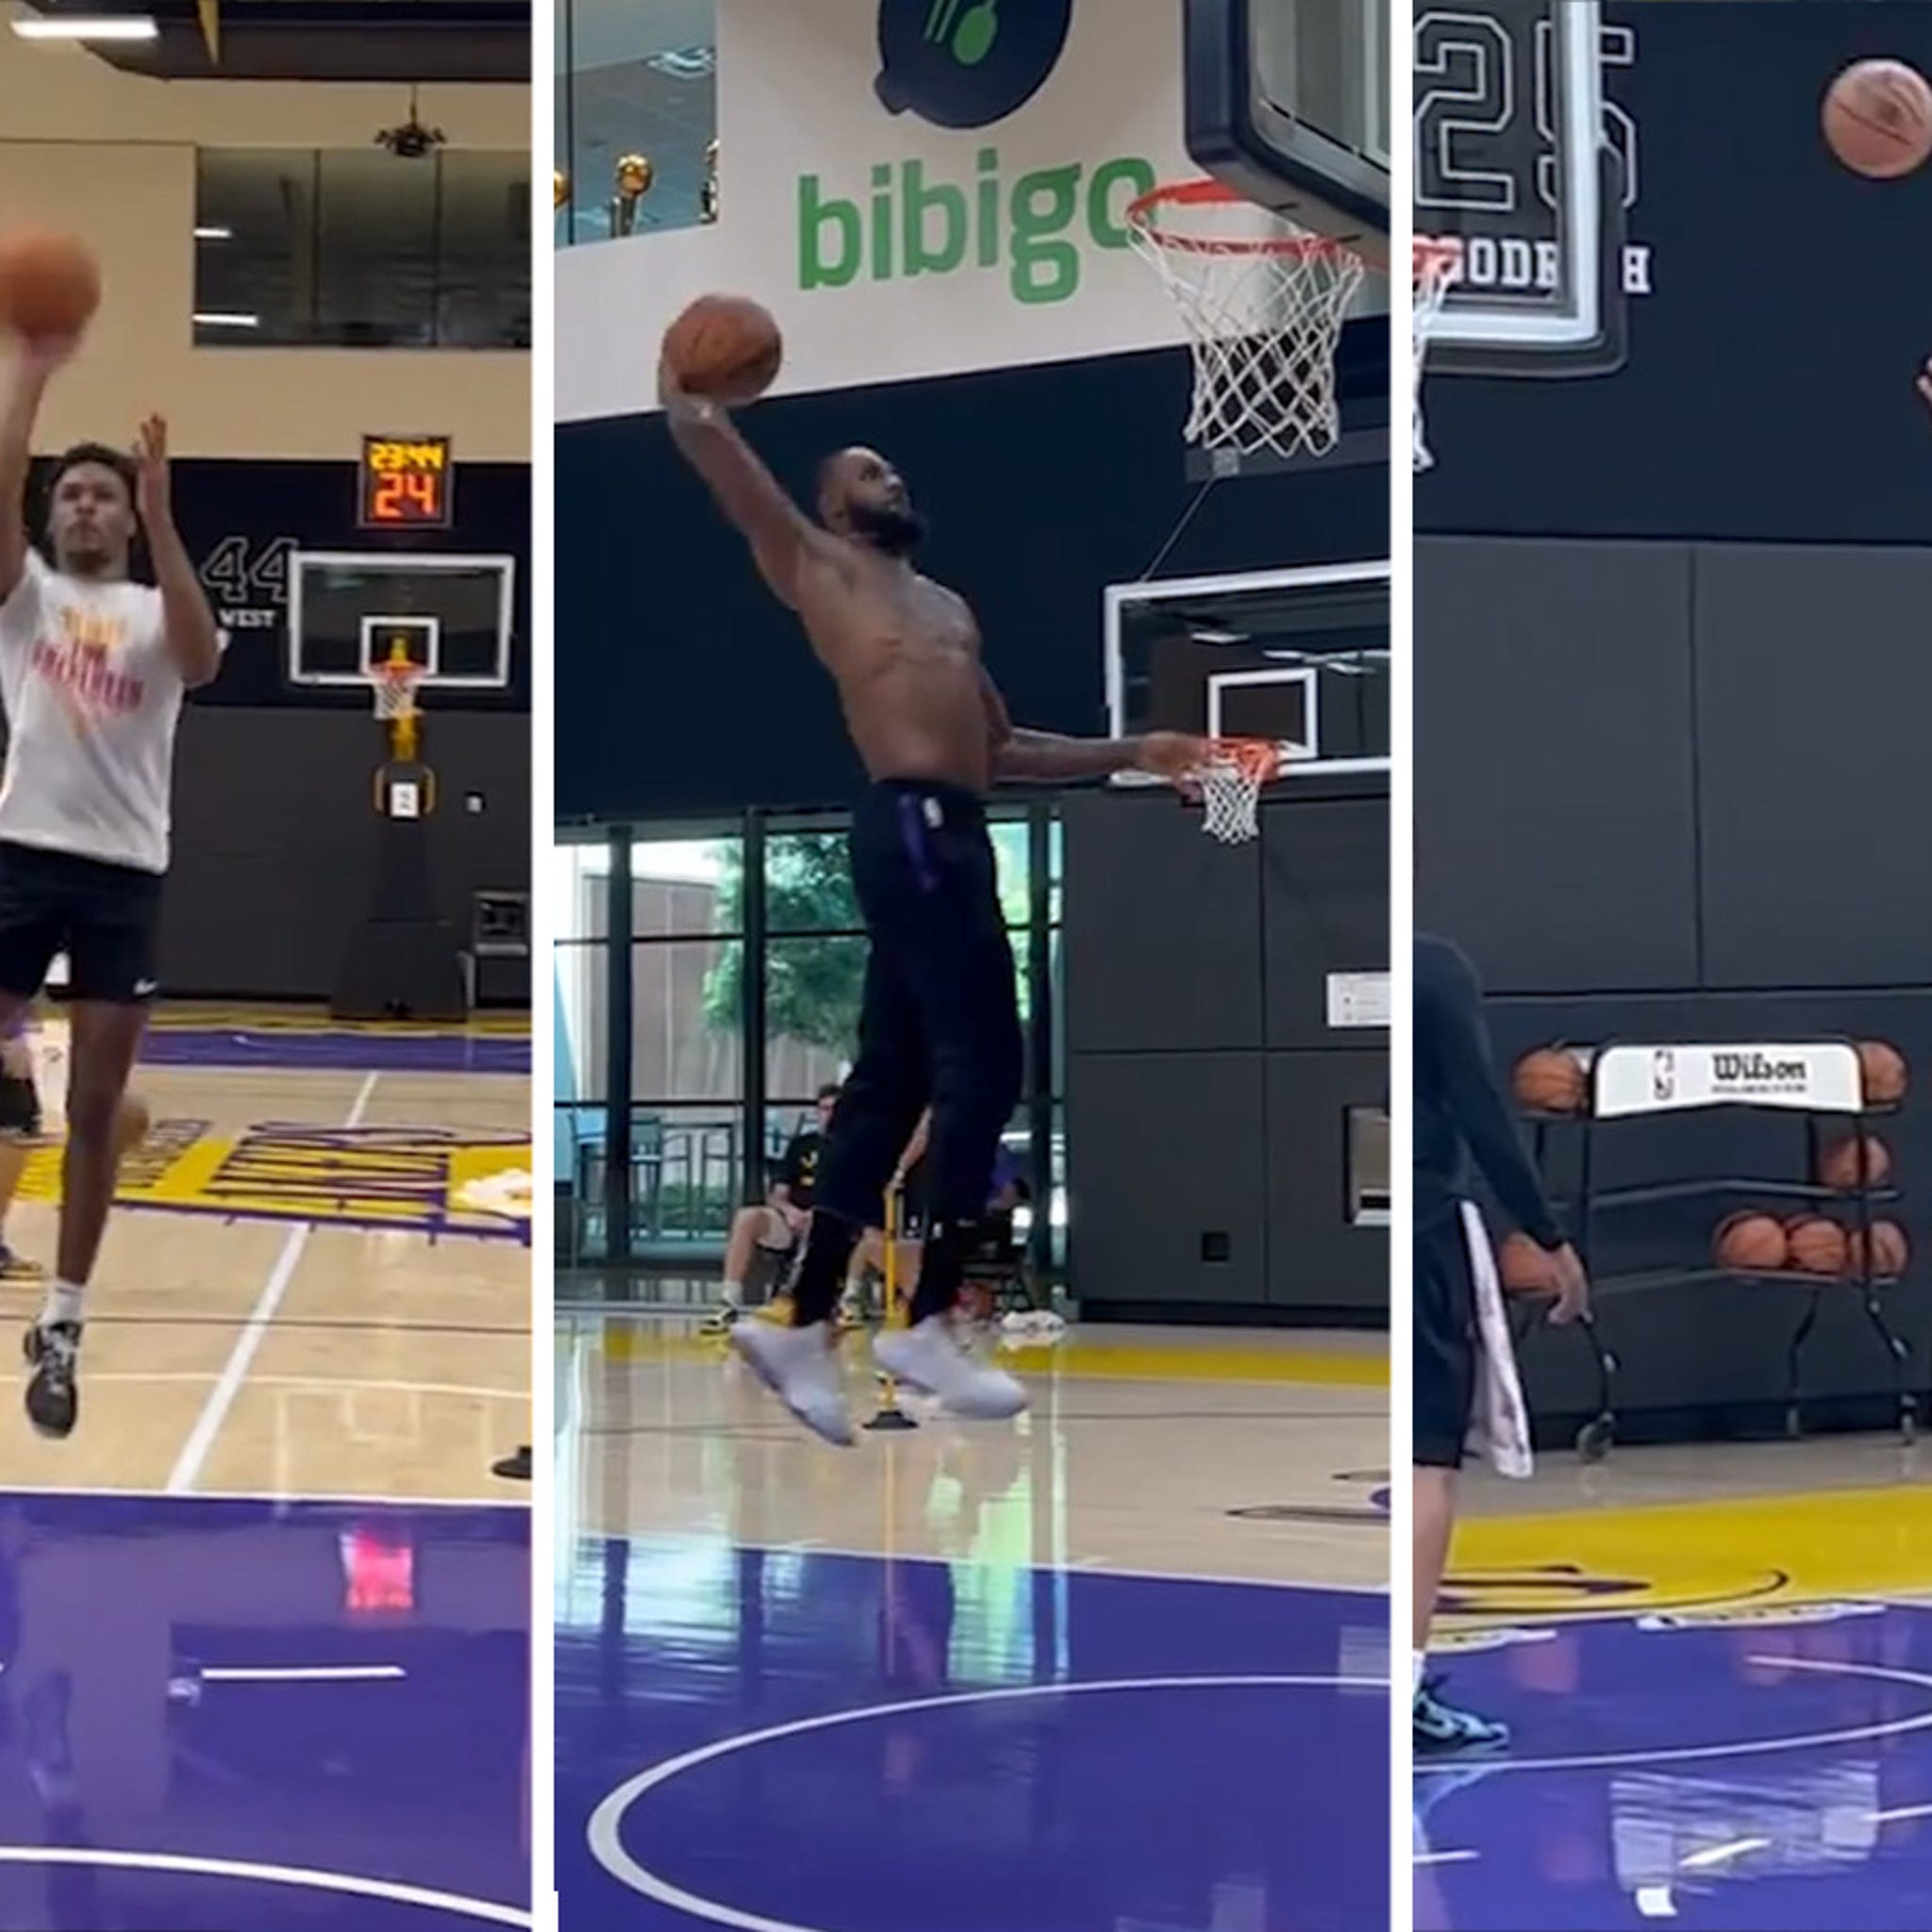 LeBron James was working out in Lakers practice facility at 4 a.m.